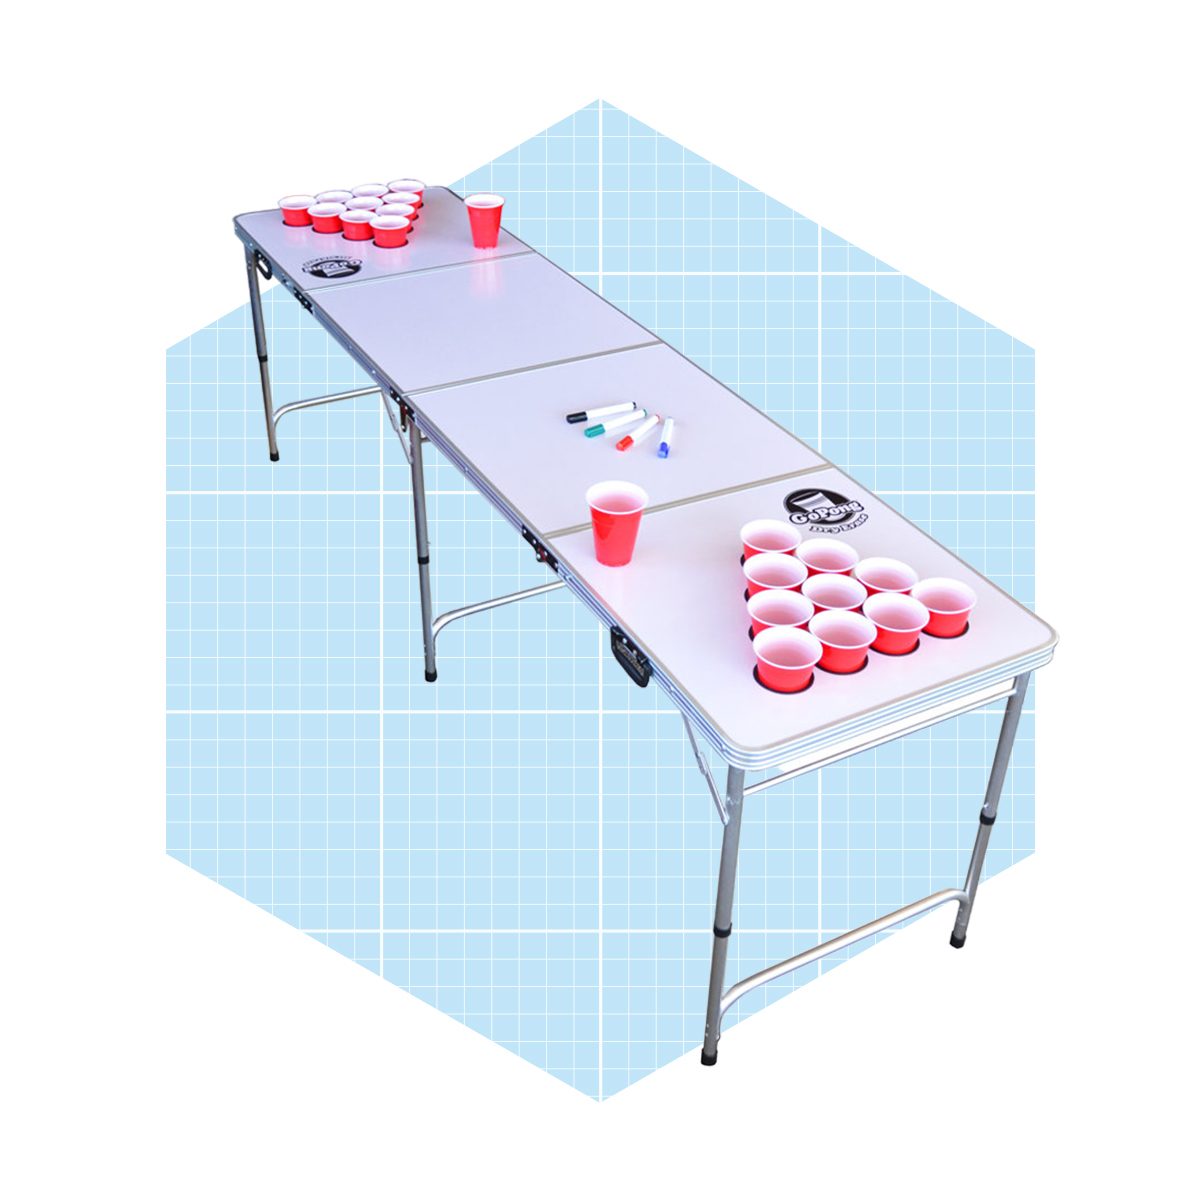 Dry Erase Beer Pong Table